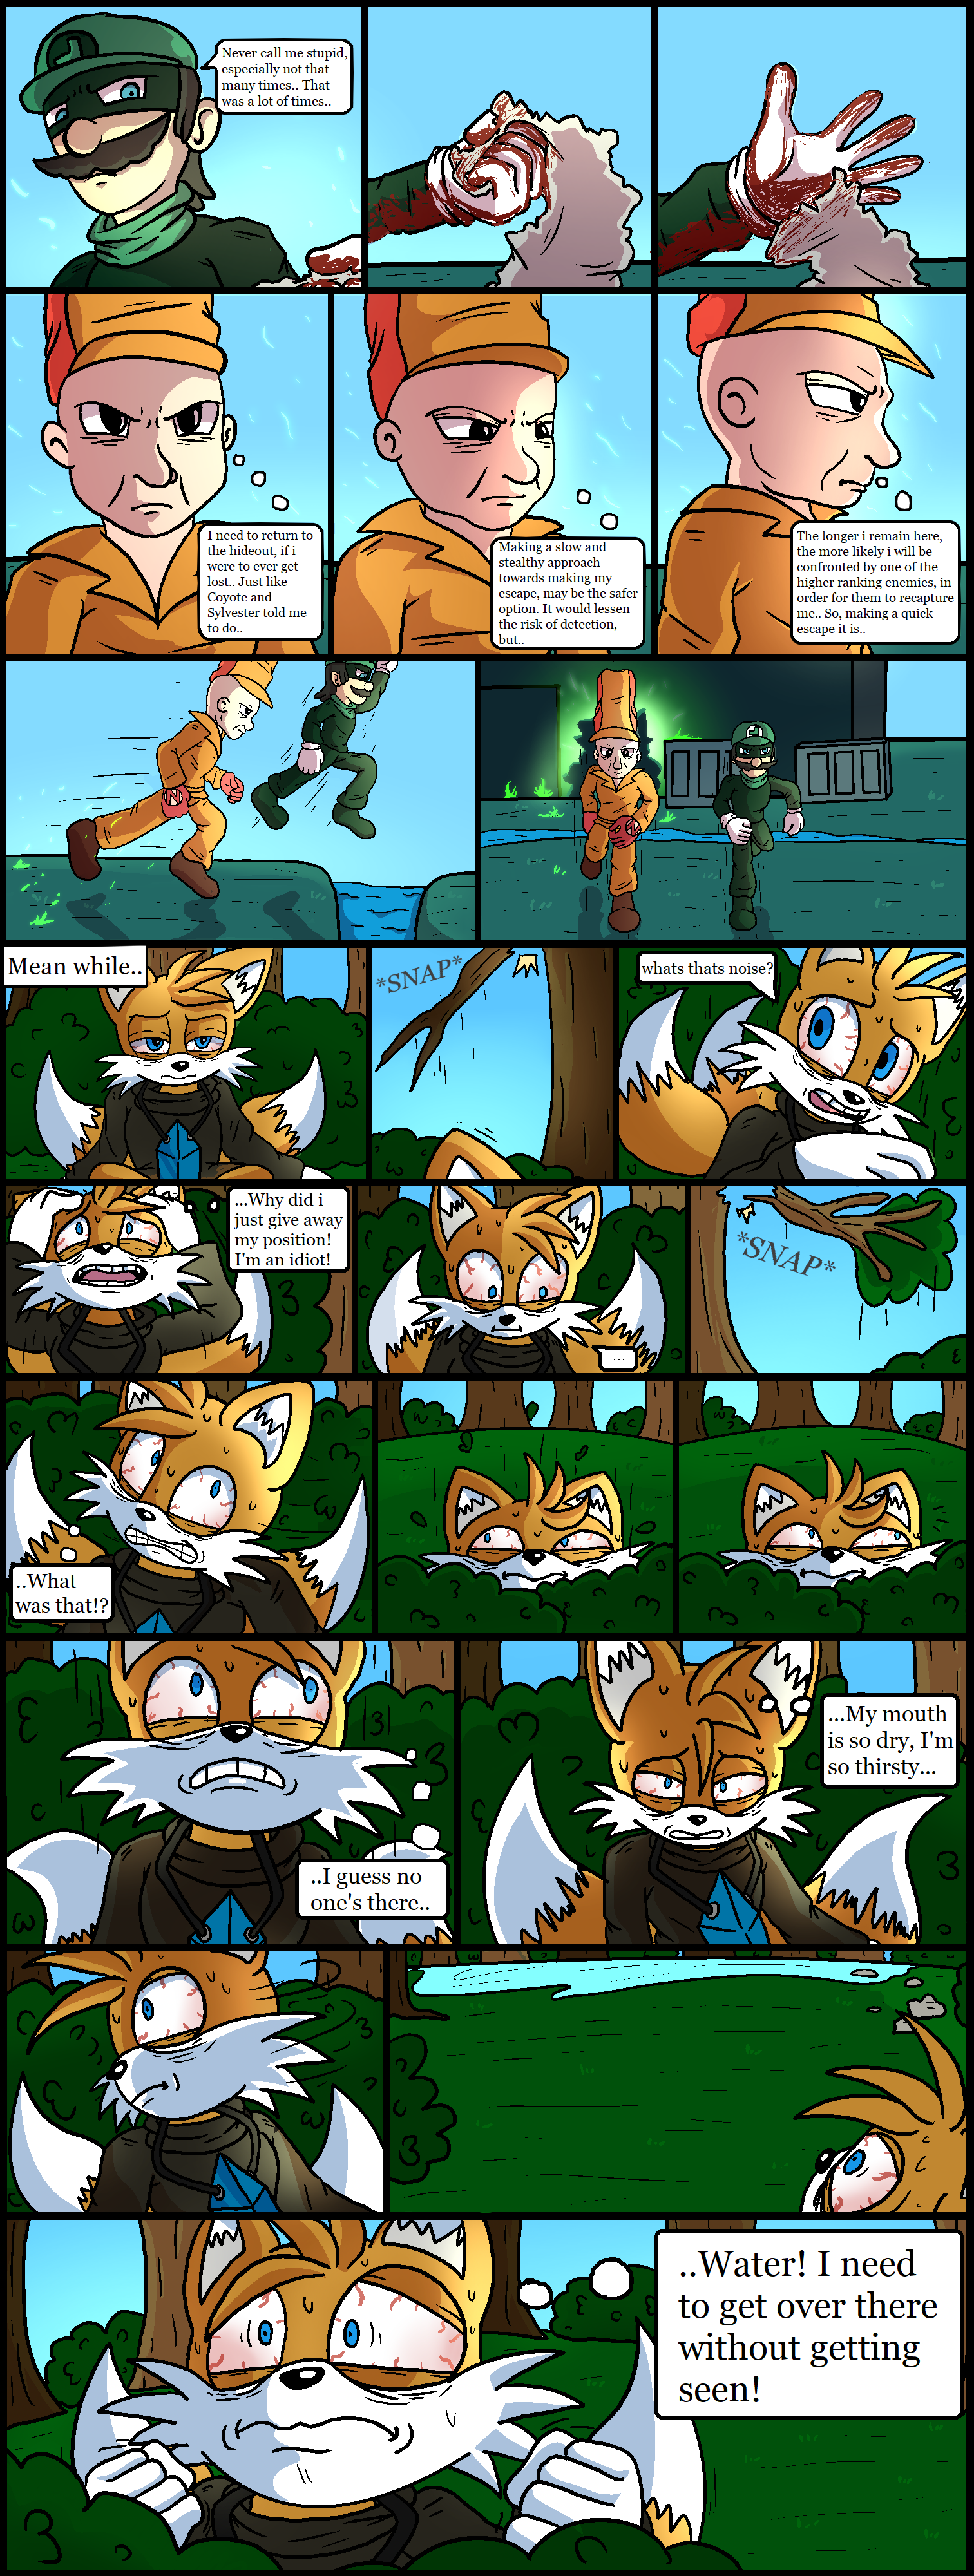 ch24/pg12.png. If you're seeing this, enable images. Or, perhaps we have a website issue. Try refreshing, if unsuccessful email c@commodorian.org with a detailed description of how you got here.